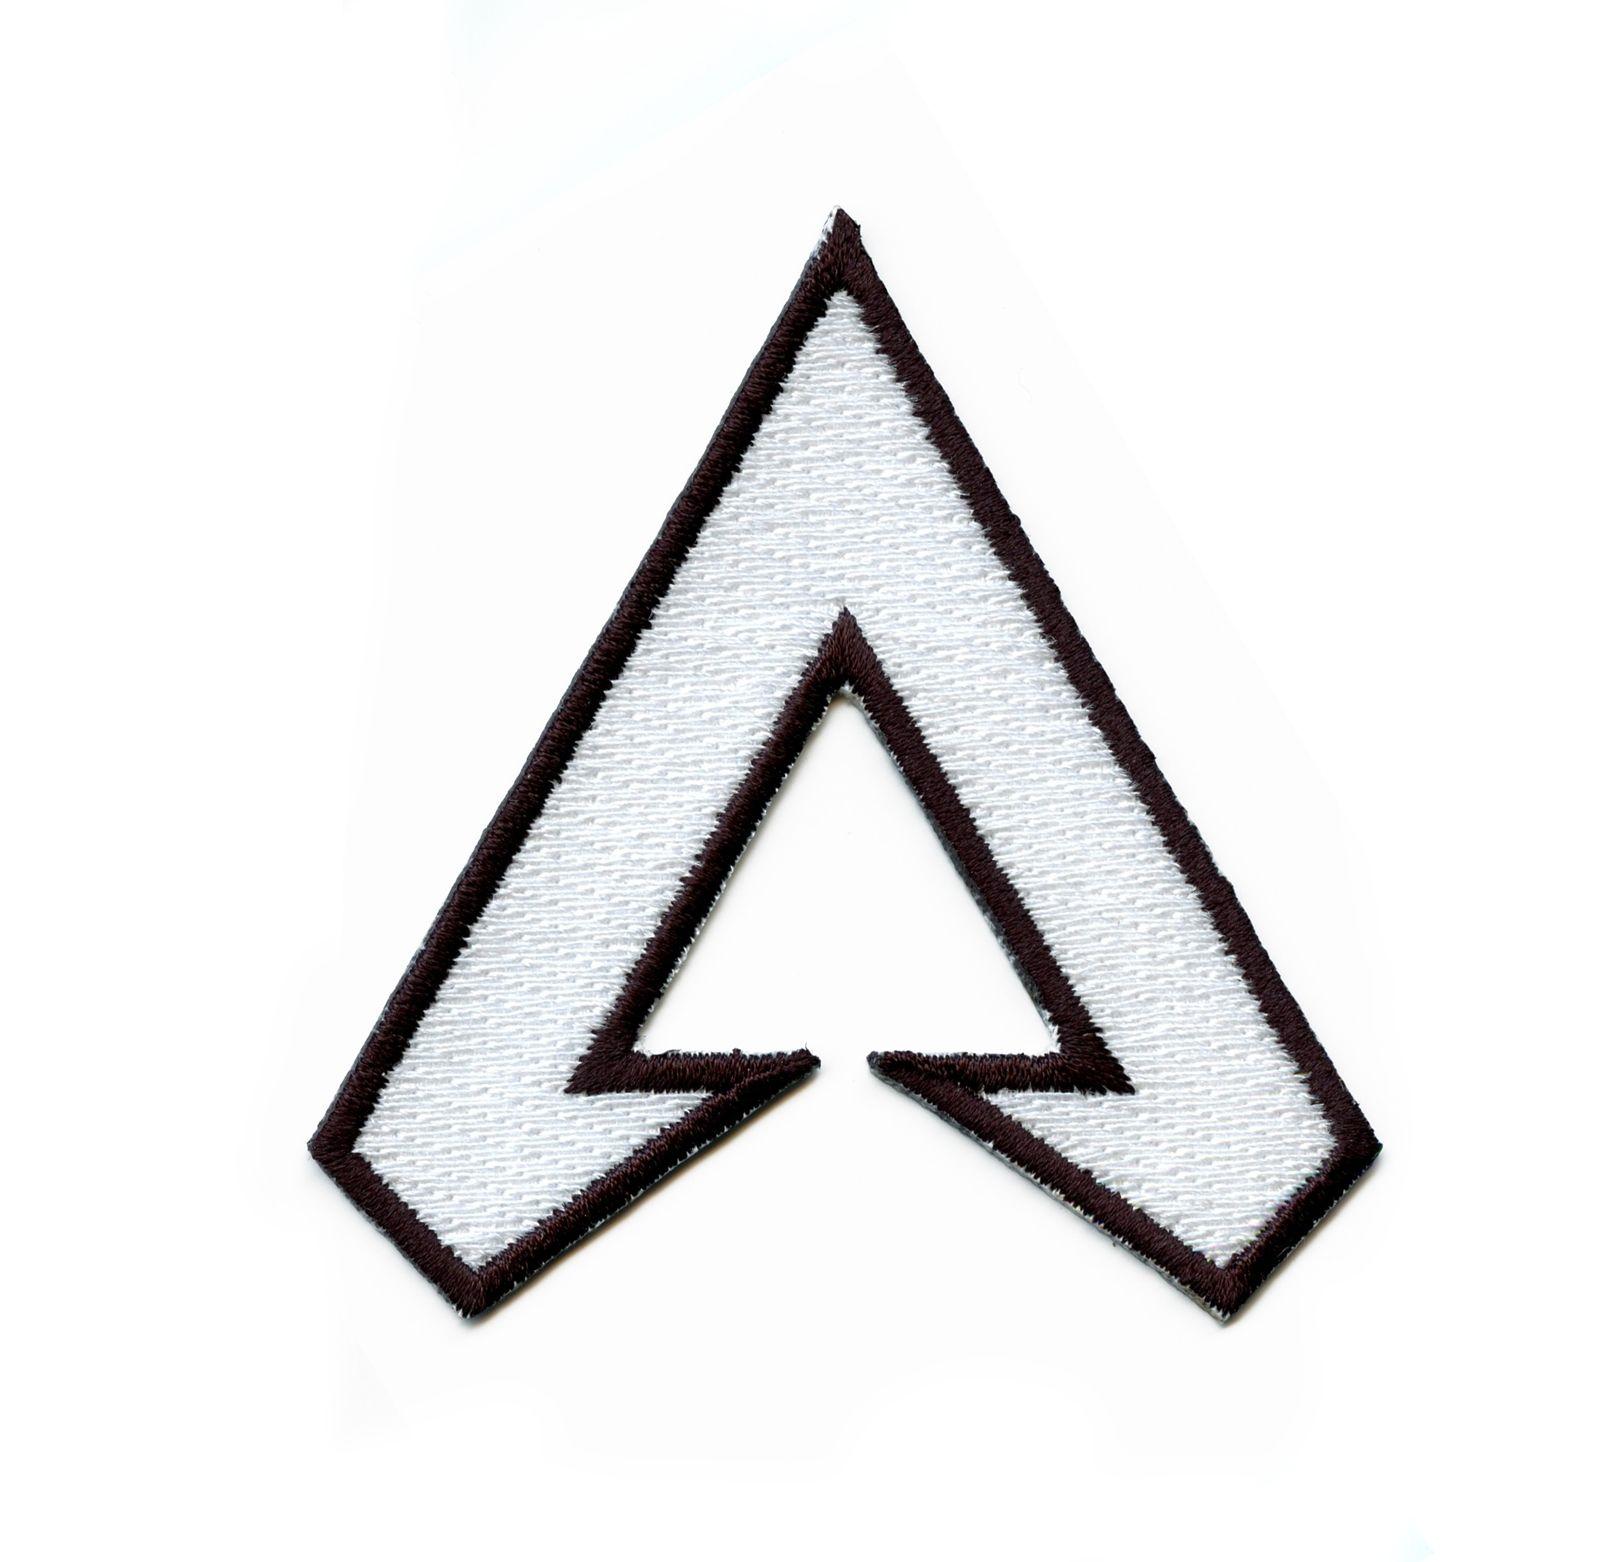 Apex Logo - Details about Apex Battle Royal Shooting Game Logo Iron On Patch